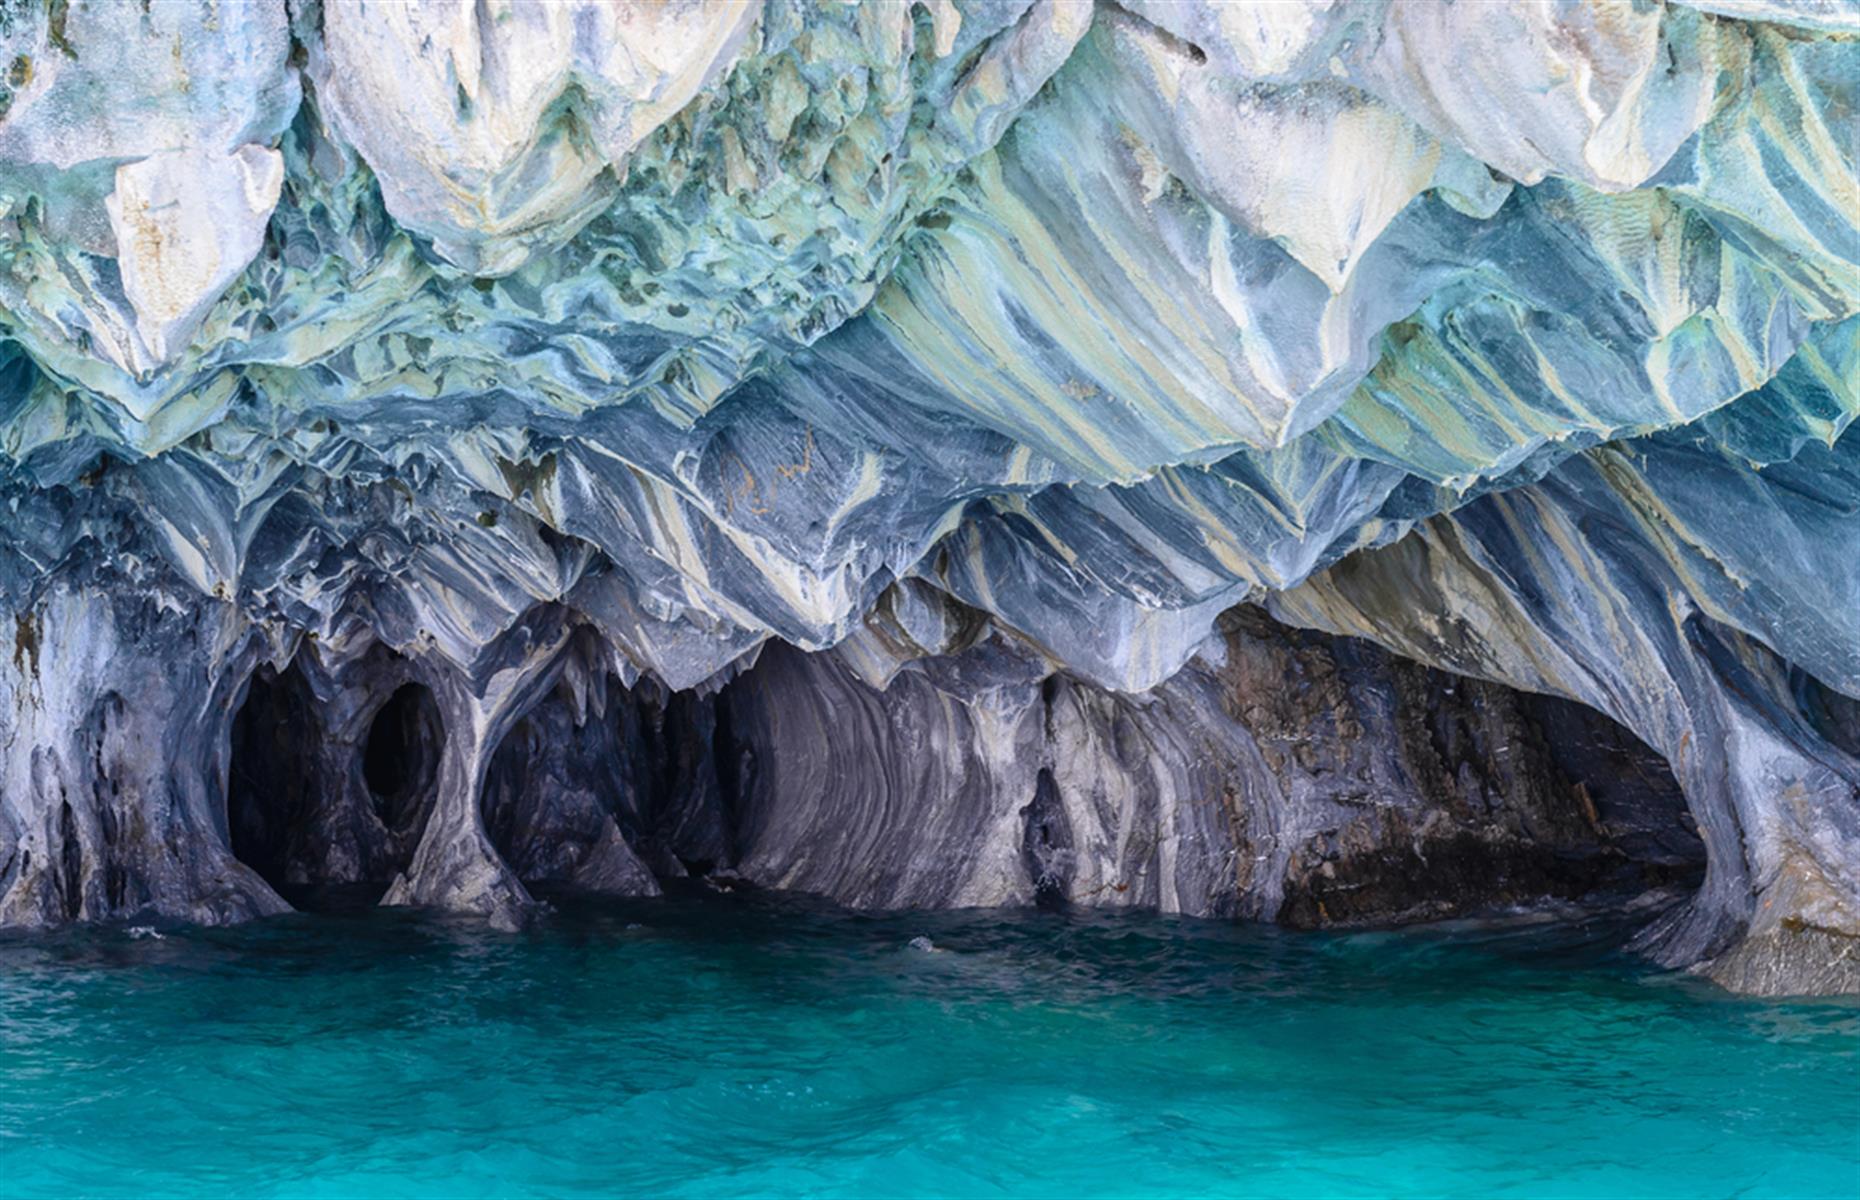 Waves crashing into solid calcium carbonate for 6,000 years is what created Chile’s incredible marble caves. Their swirling blue pattern changes color and intensity throughout the year. You’ll need to join a boat tour to visit these caves as they’re in the middle of Lake General Carrera.